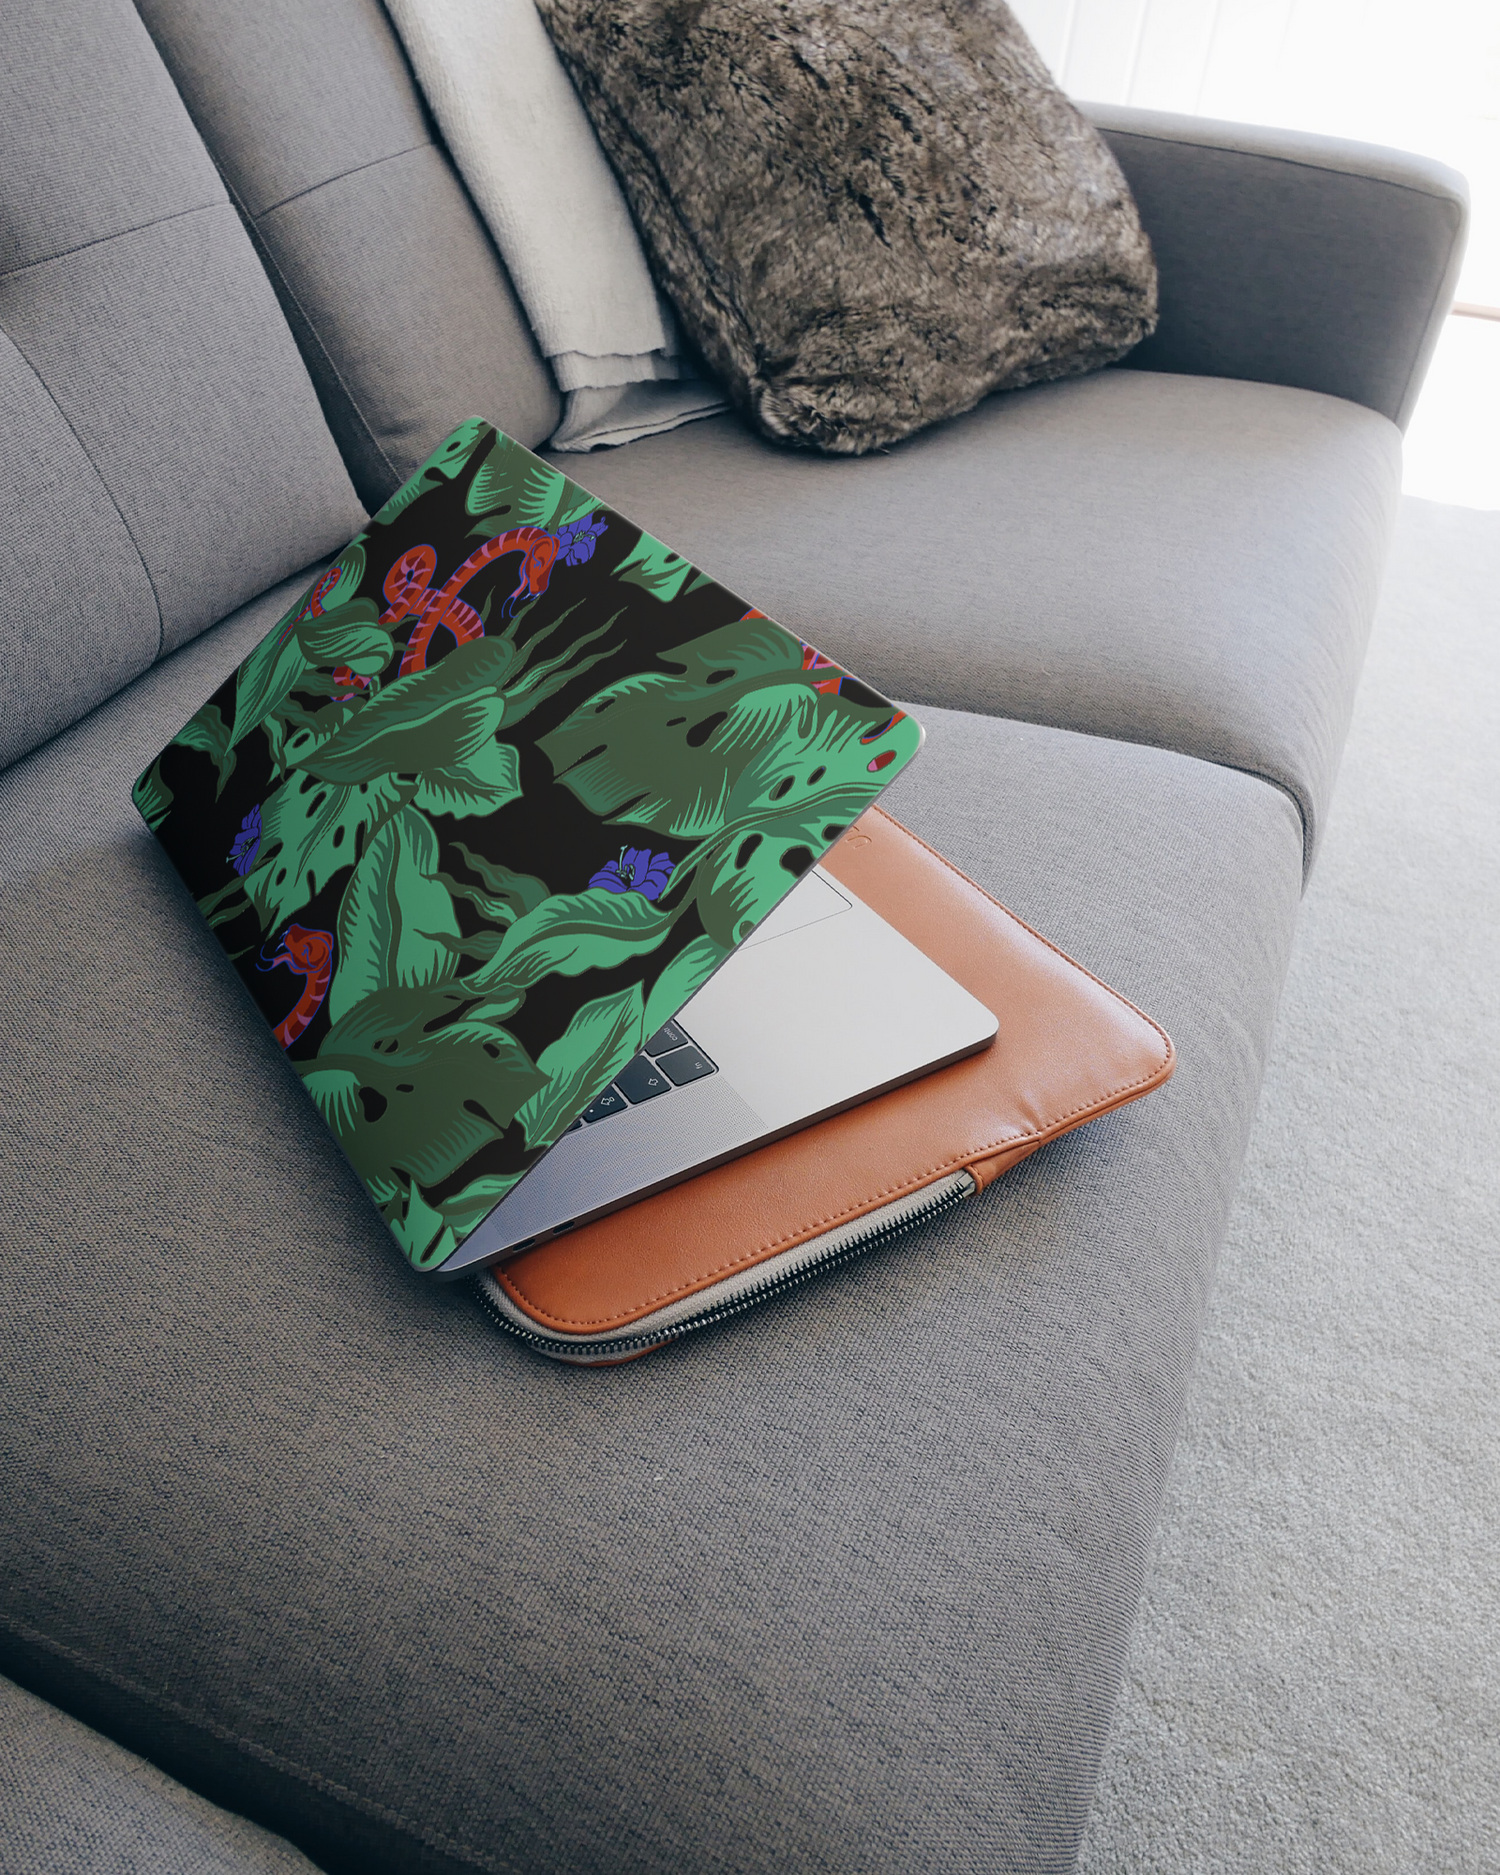 Tropical Snakes Laptop Skin for 15 inch Apple MacBooks on a couch